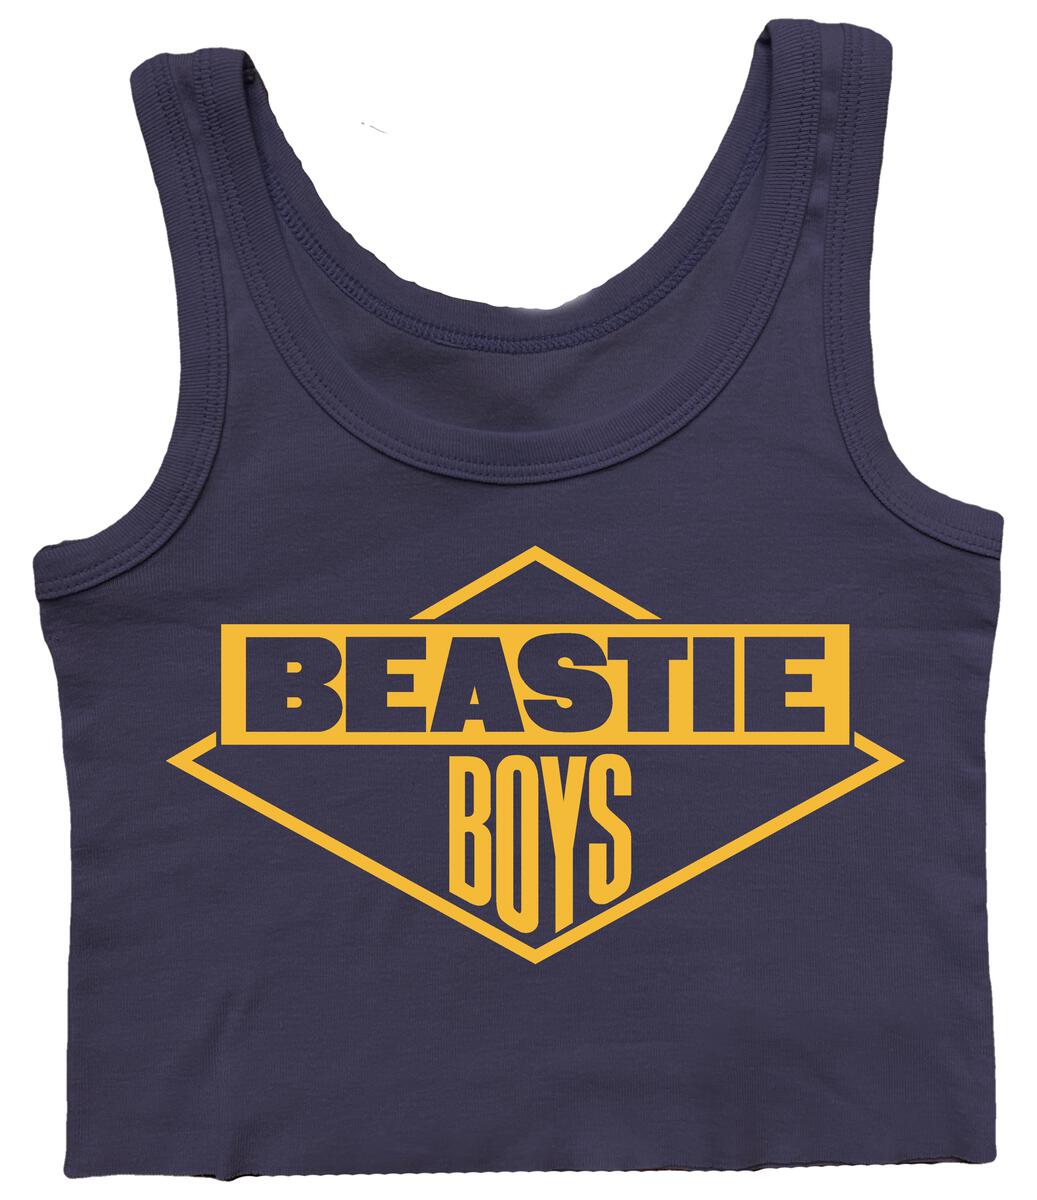 Beastie Boys Crop Tee by Rowdy Sprout